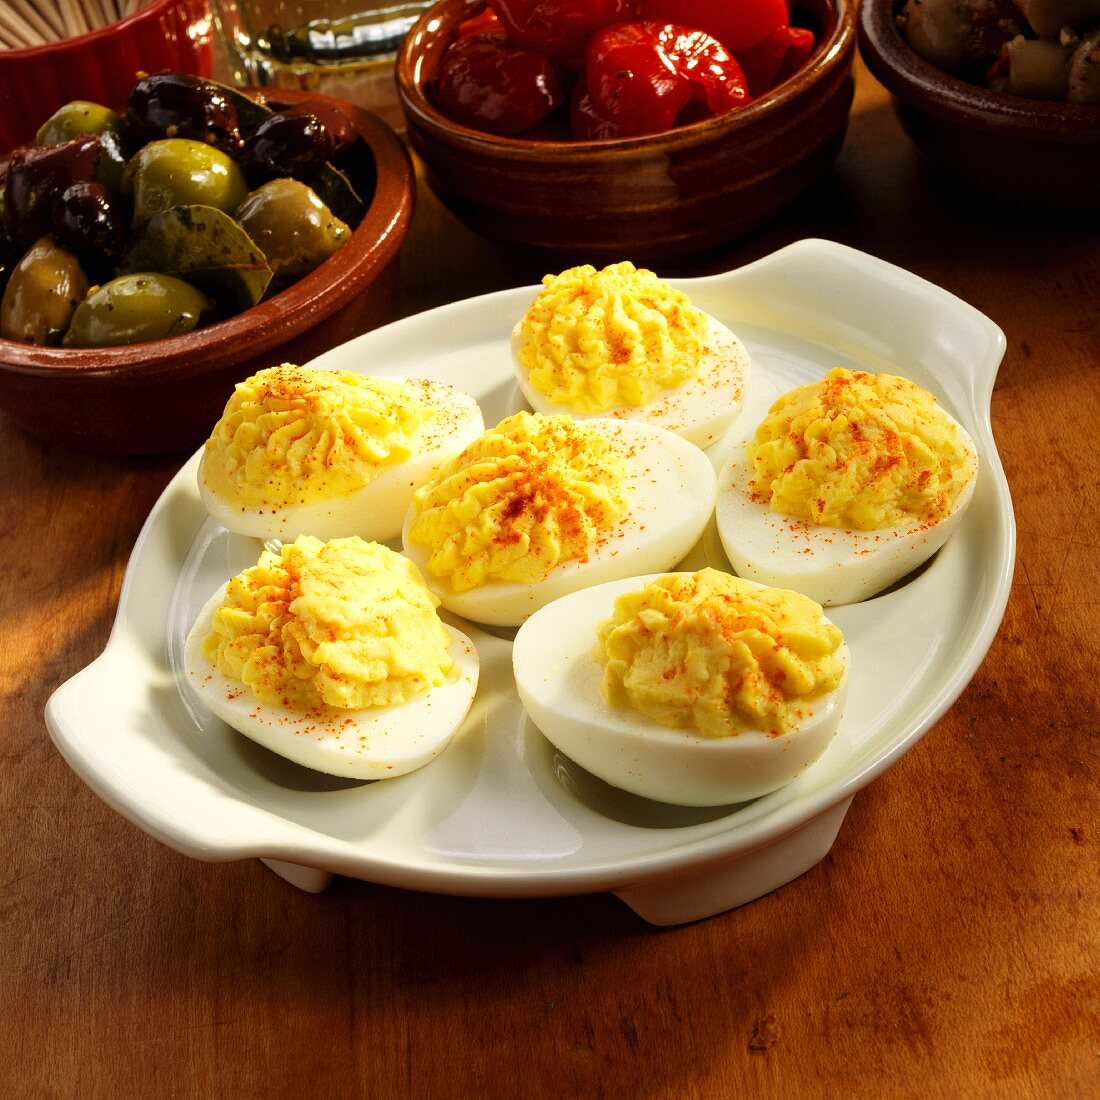 Dish of Deviled Eggs with Olives and Peppers in the Background